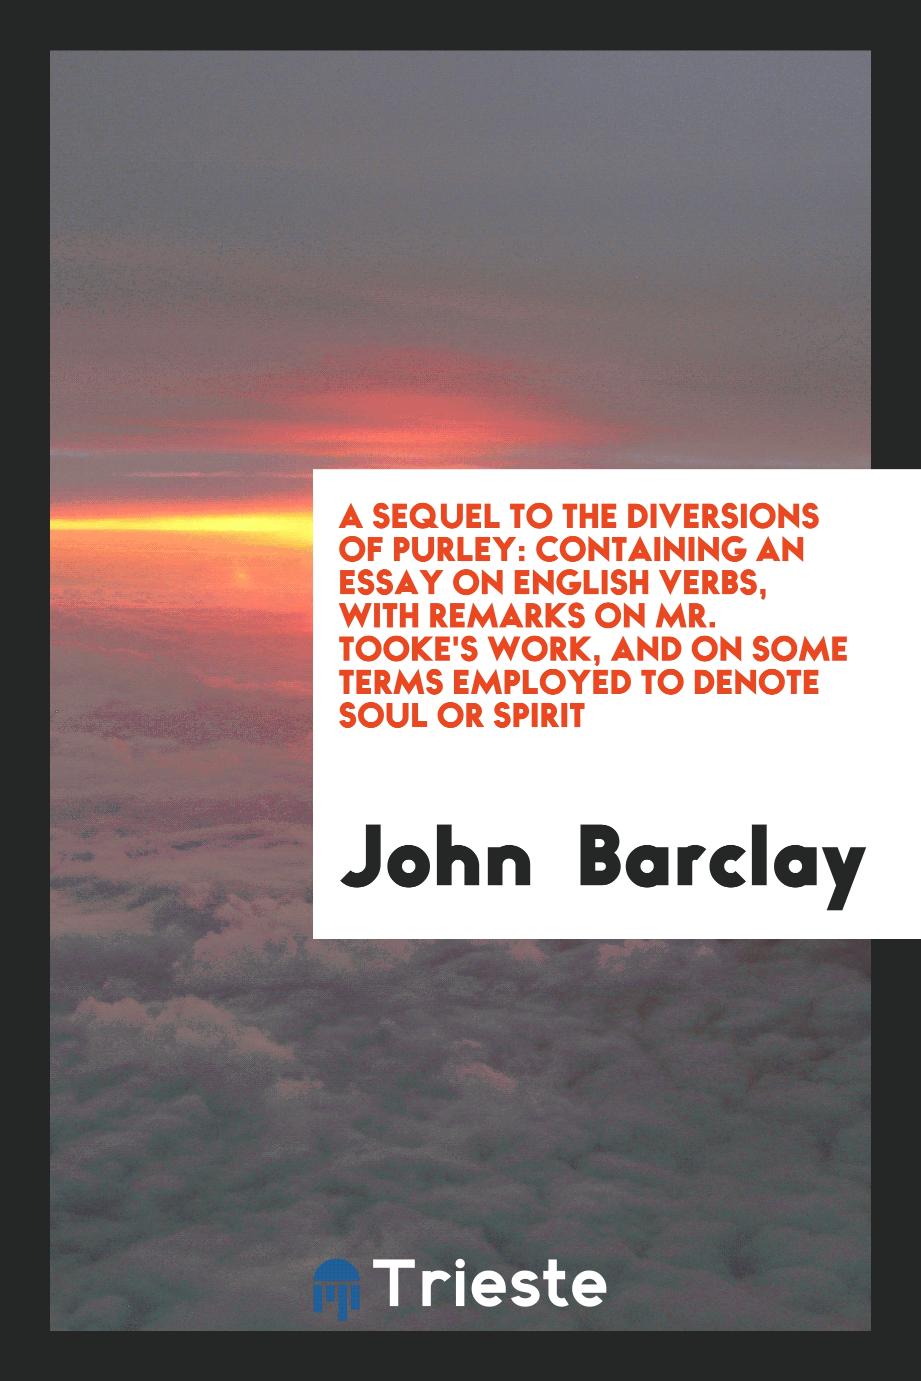 A Sequel to the Diversions of Purley: Containing an Essay on English Verbs, with Remarks on Mr. Tooke's Work, and on Some Terms Employed to Denote Soul or Spirit